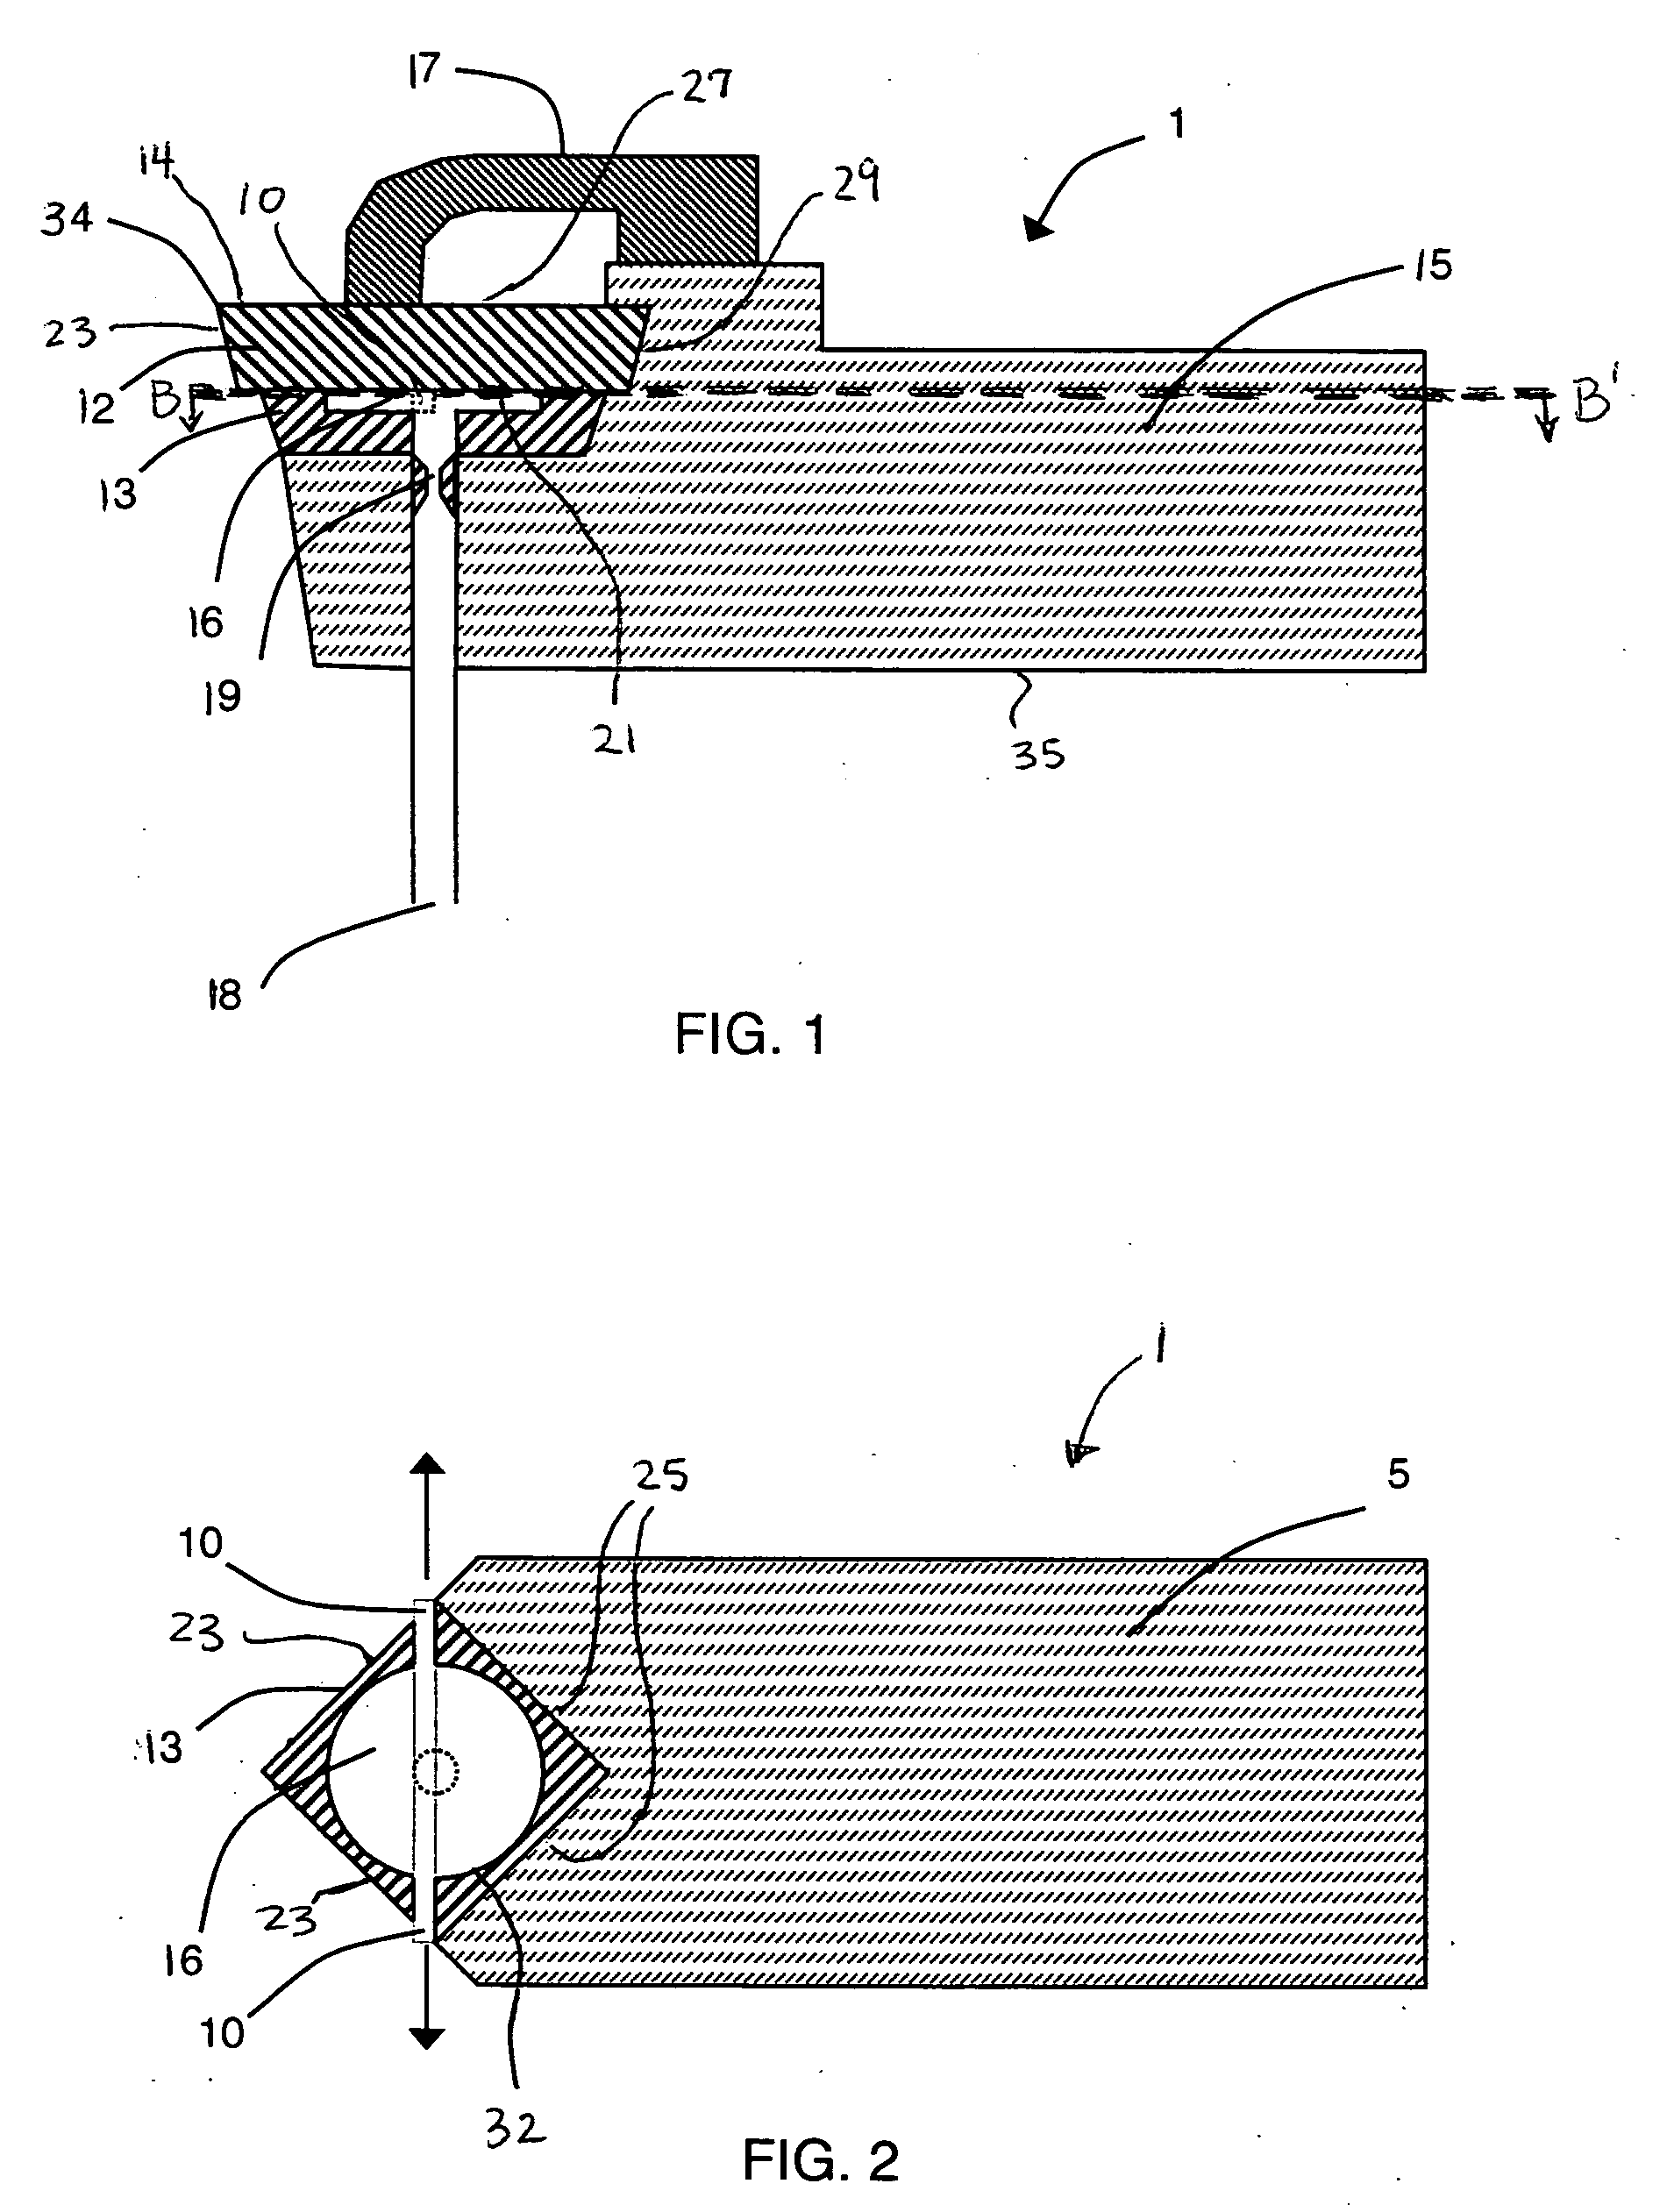 Method and apparatus for machining workpieces having interruptions